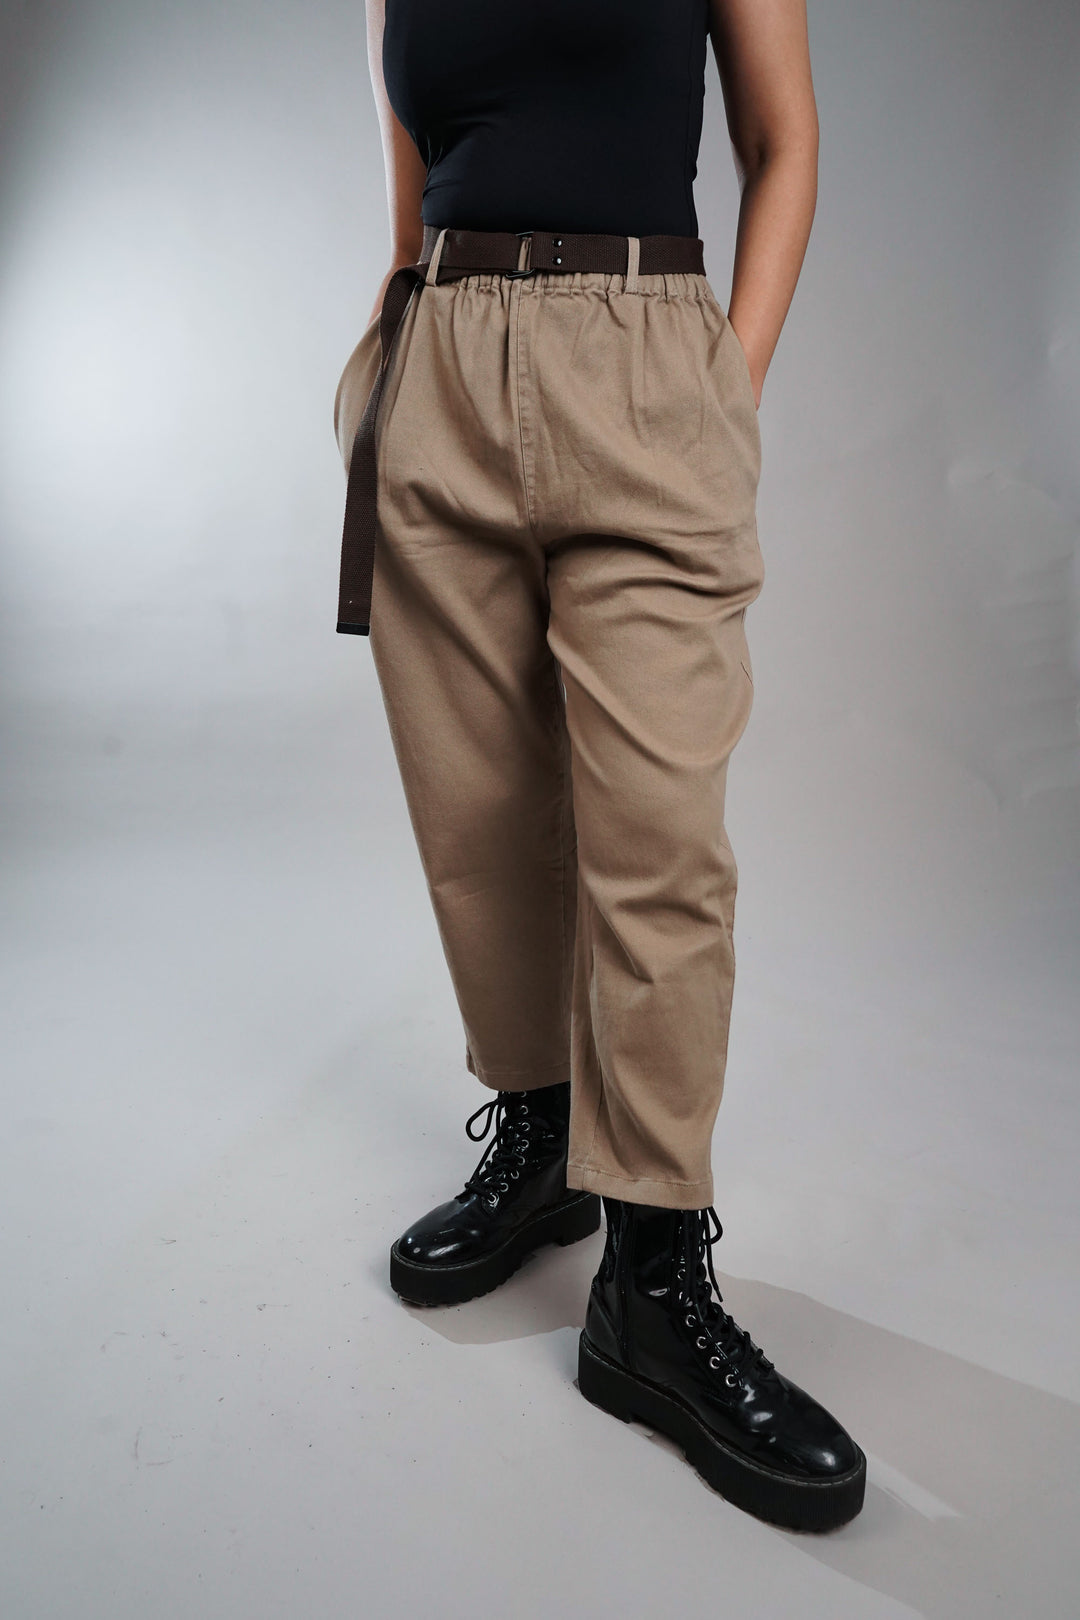 Cream colored straight trouser pants with belt